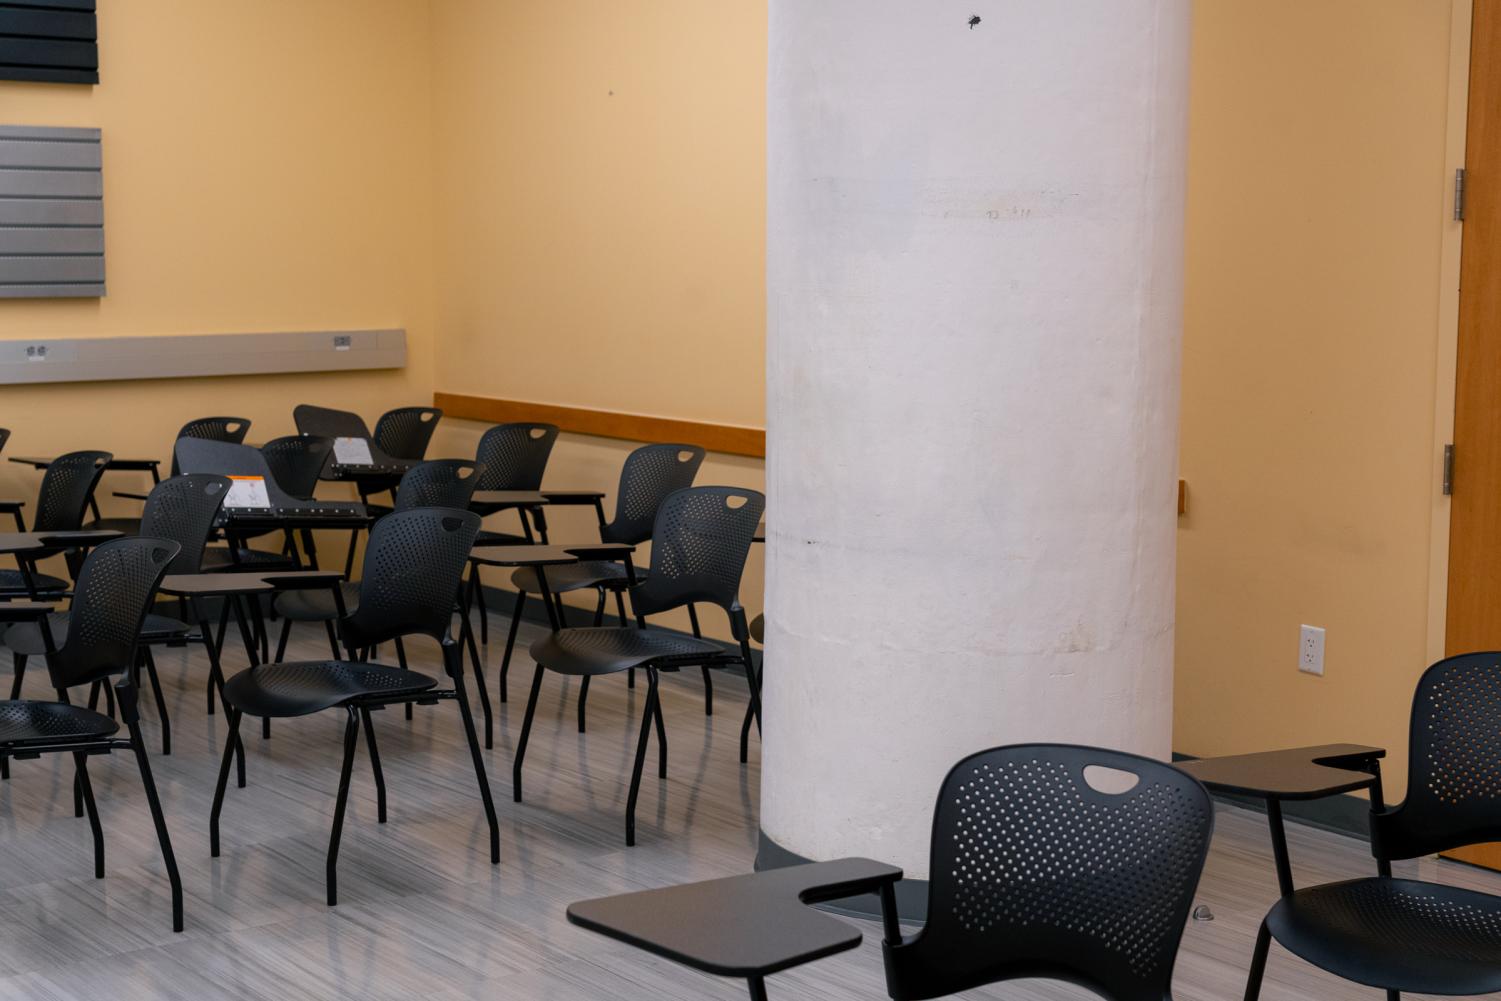 A large, white pillar divides chairs with attached desks in a Rogers Hall classroom.